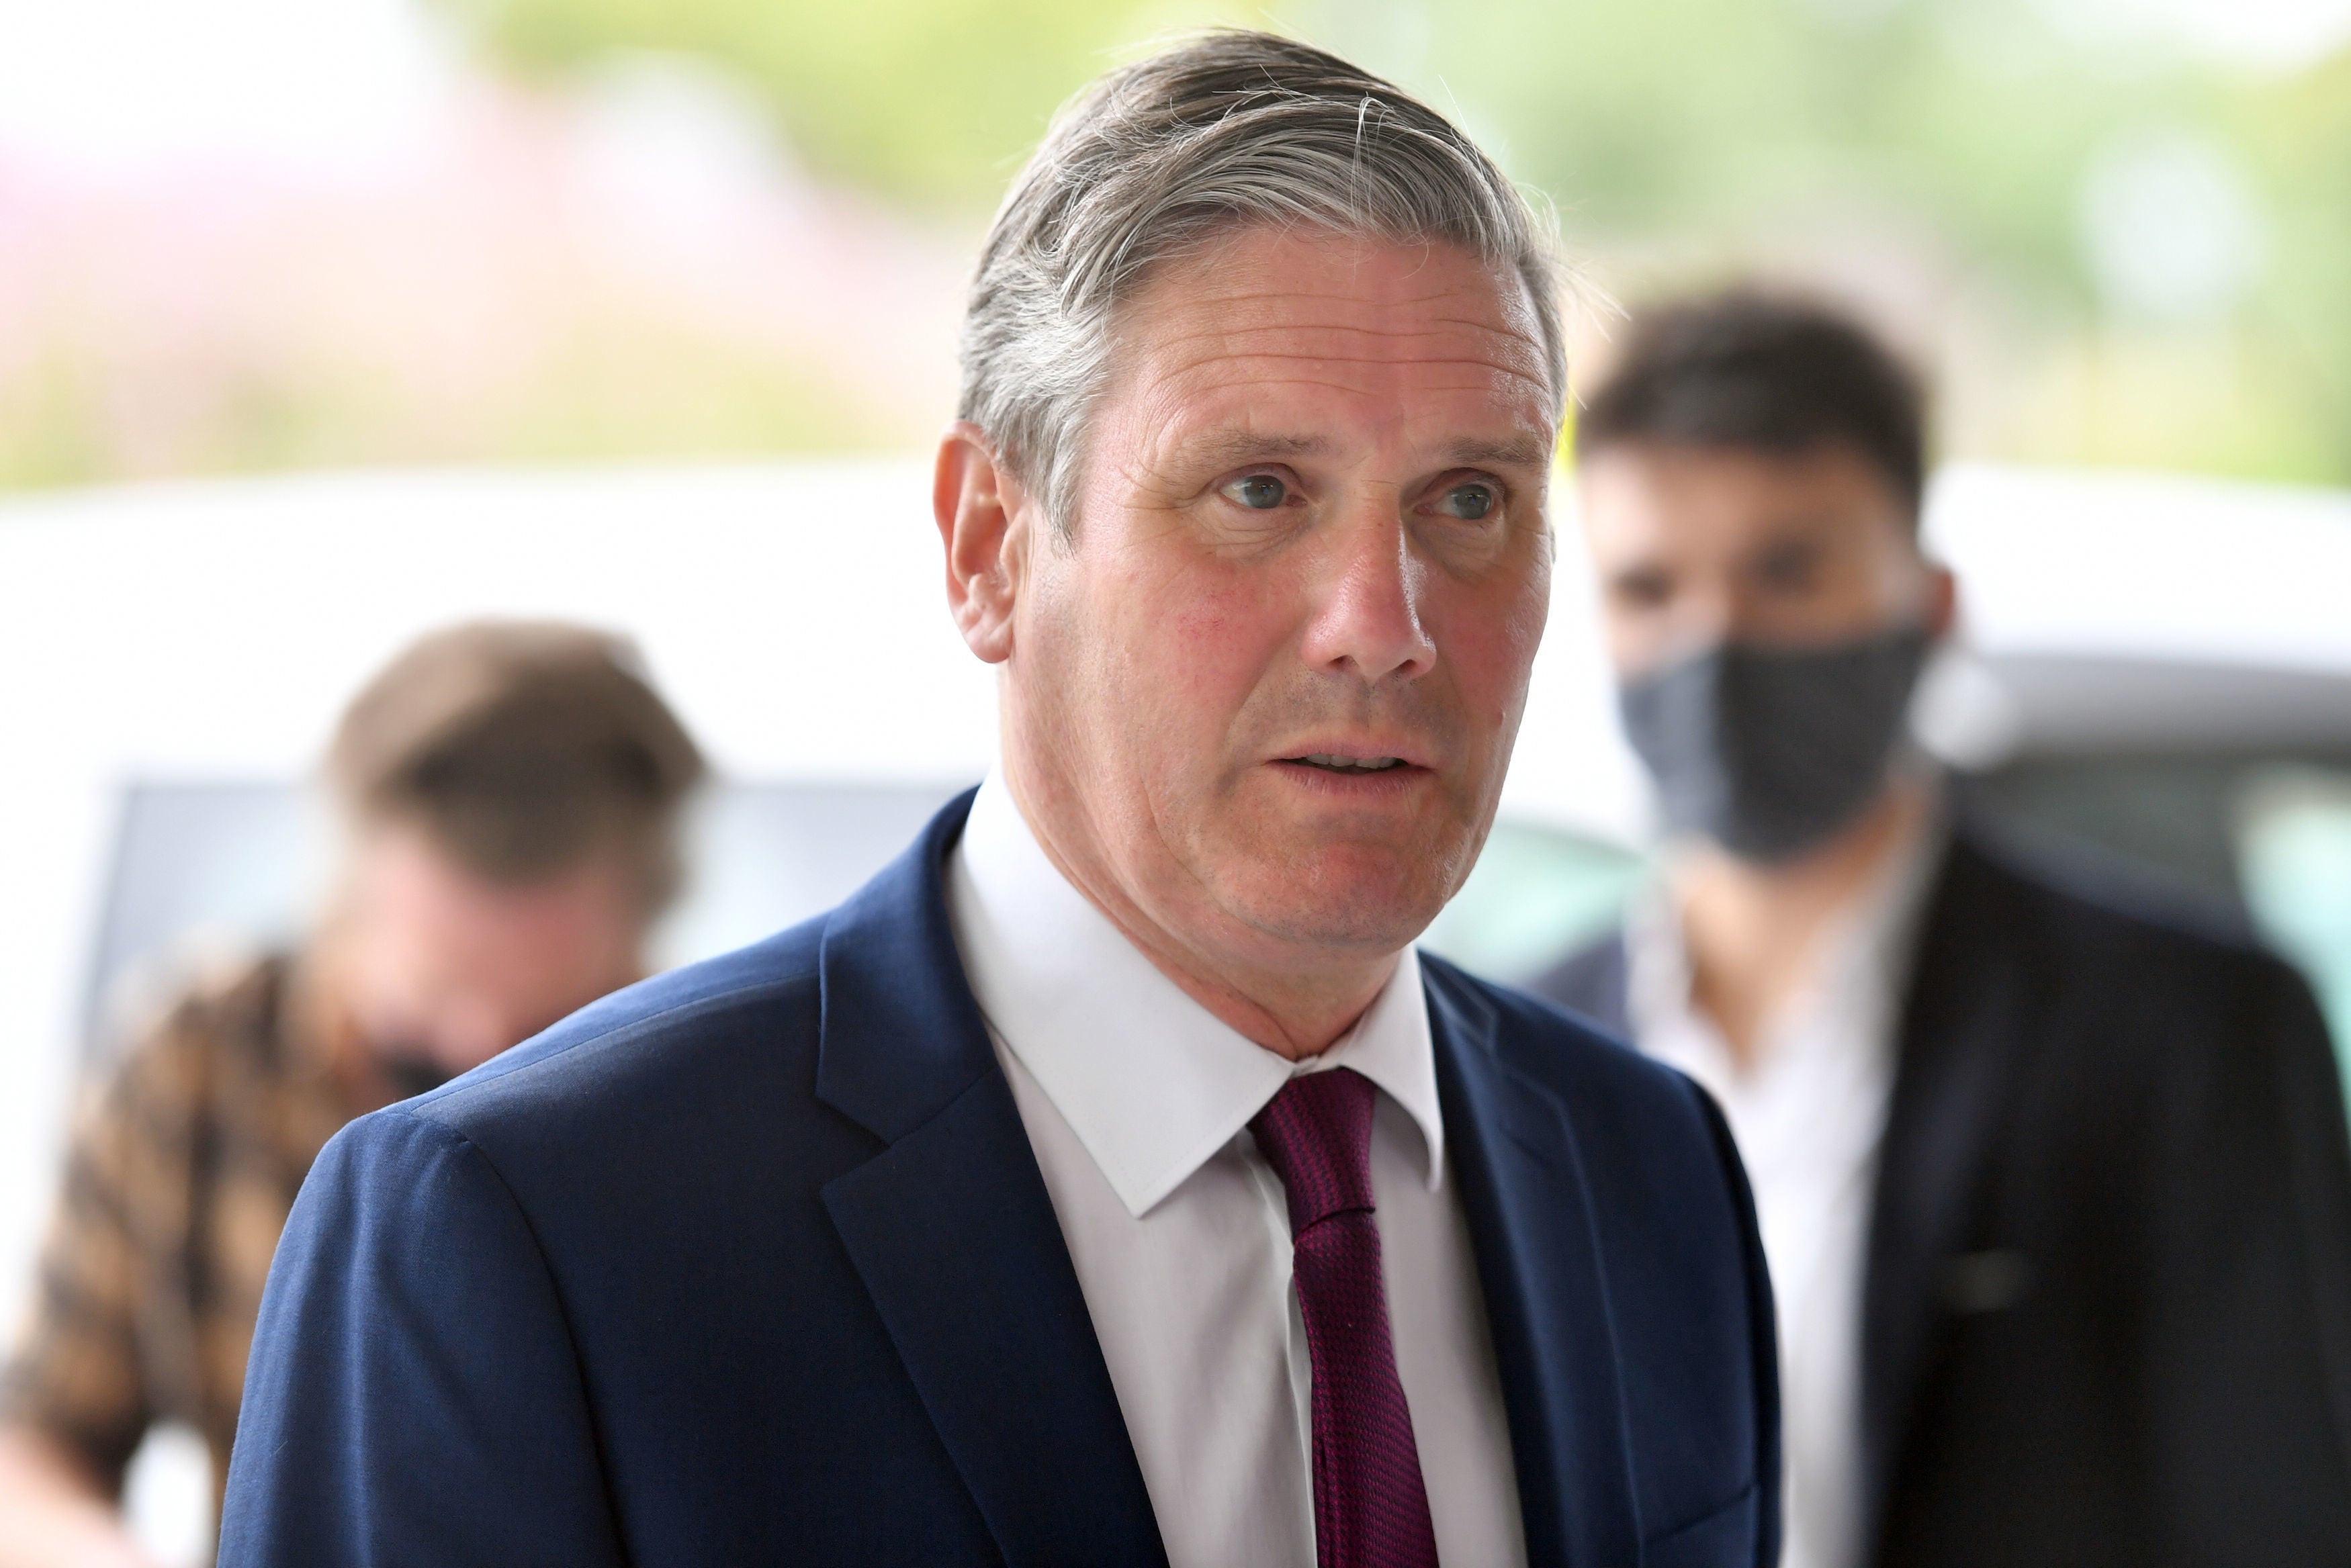 The timing of Starmer’s election as leader could not have been worse